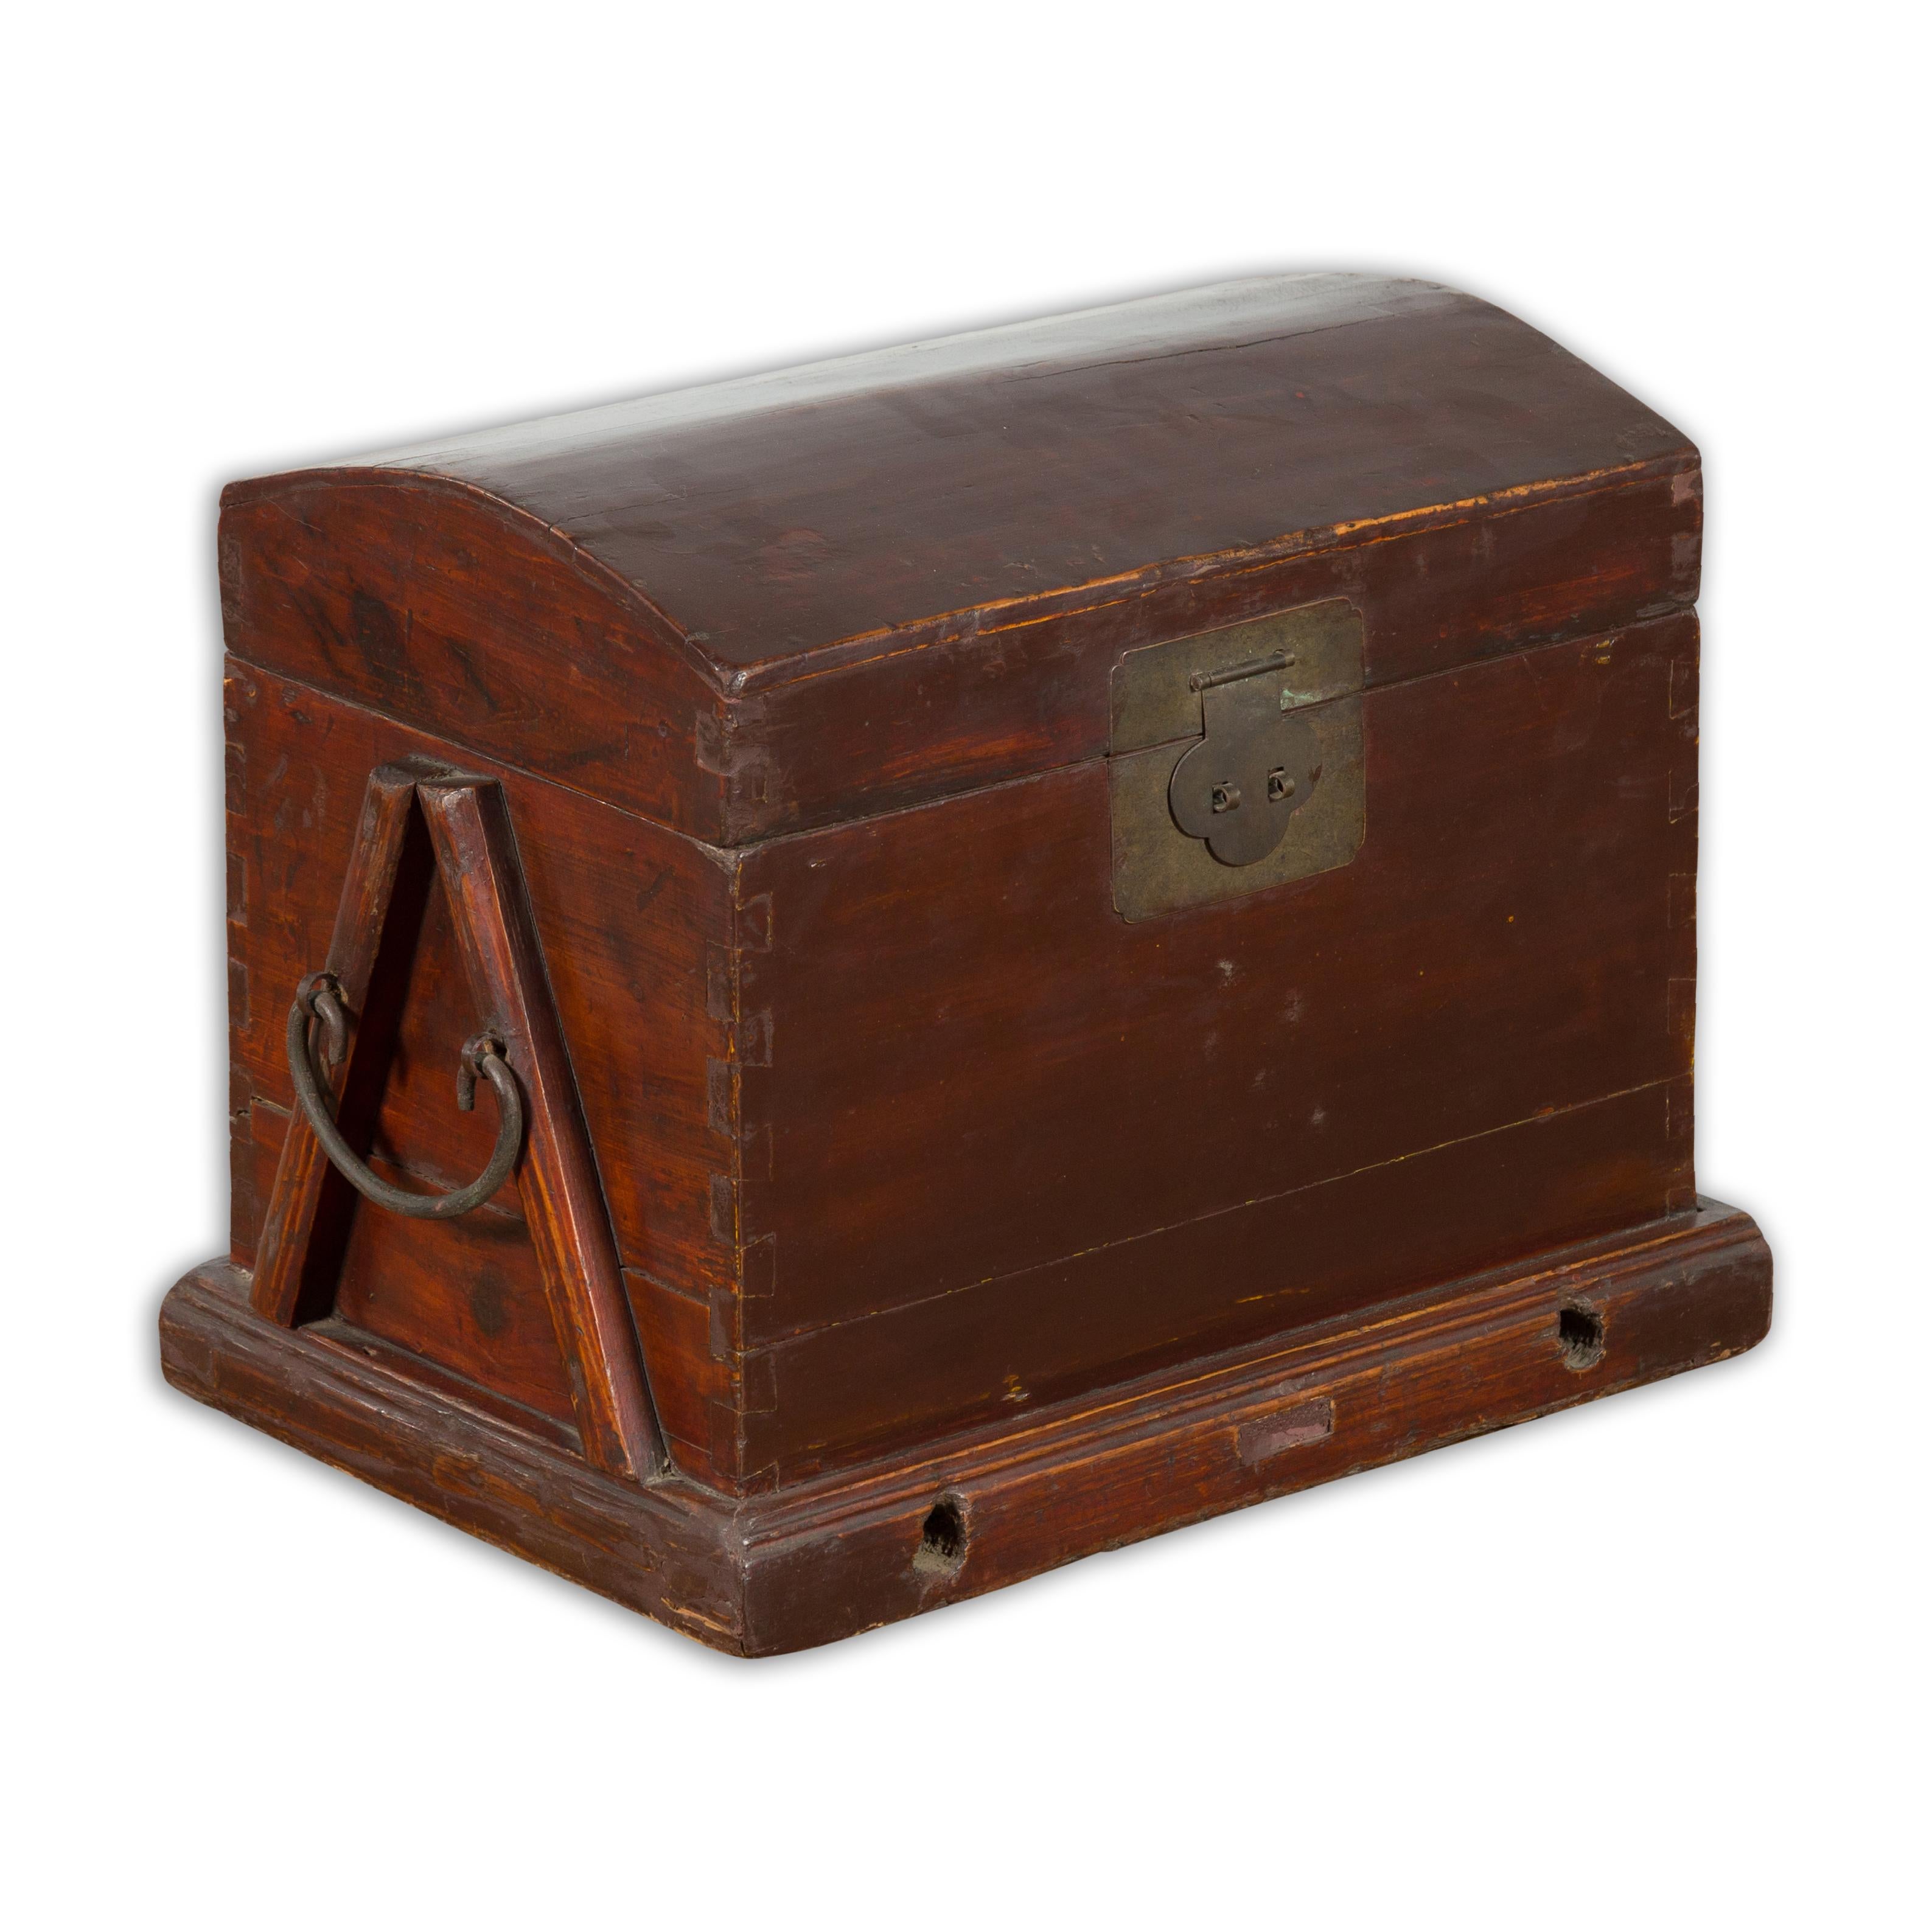 An antique Chinese Late Qing Dynasty period wooden document box from the early 20th century with reddish brown lacquer, brass hardware and carrying handles. Created in China during the late Qing Dynasty period in the early years of the 20th century,